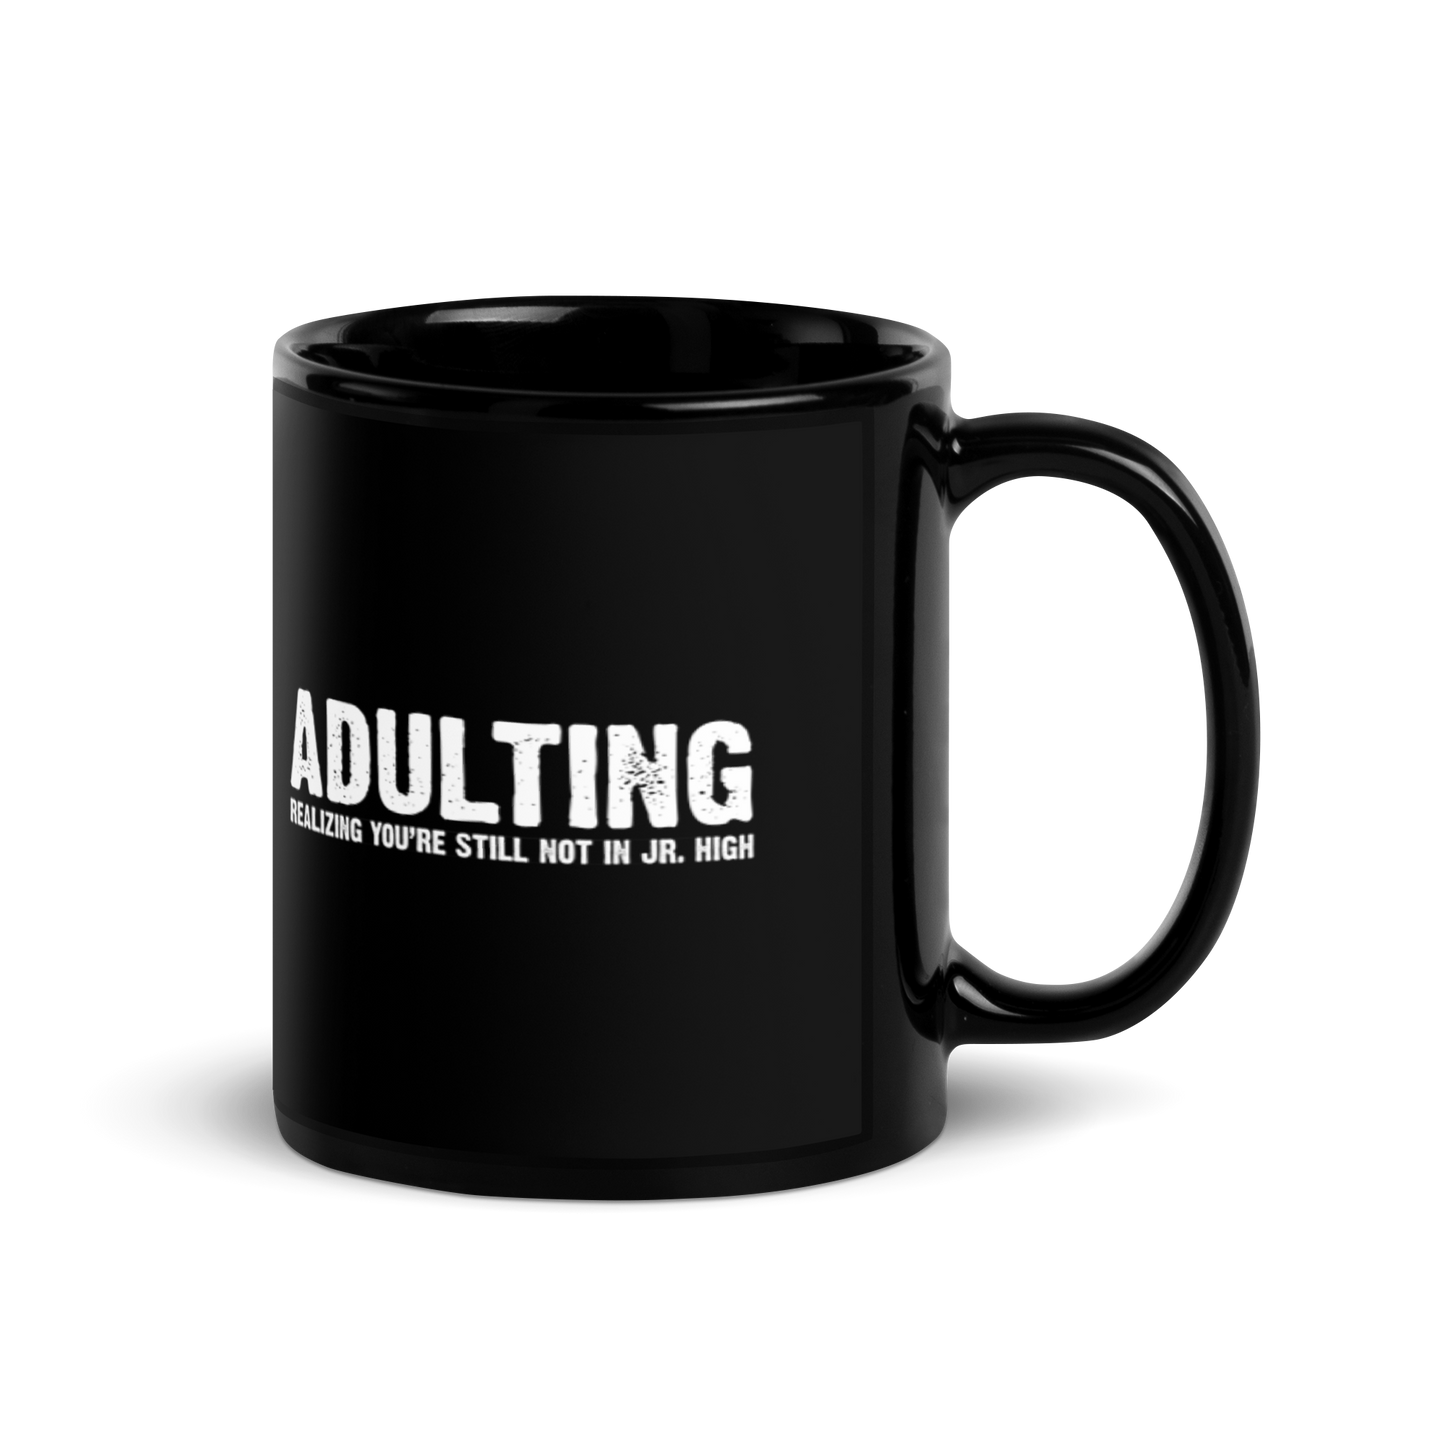 Adulting, Realizing you're not still in Jr. High - Funny Mug